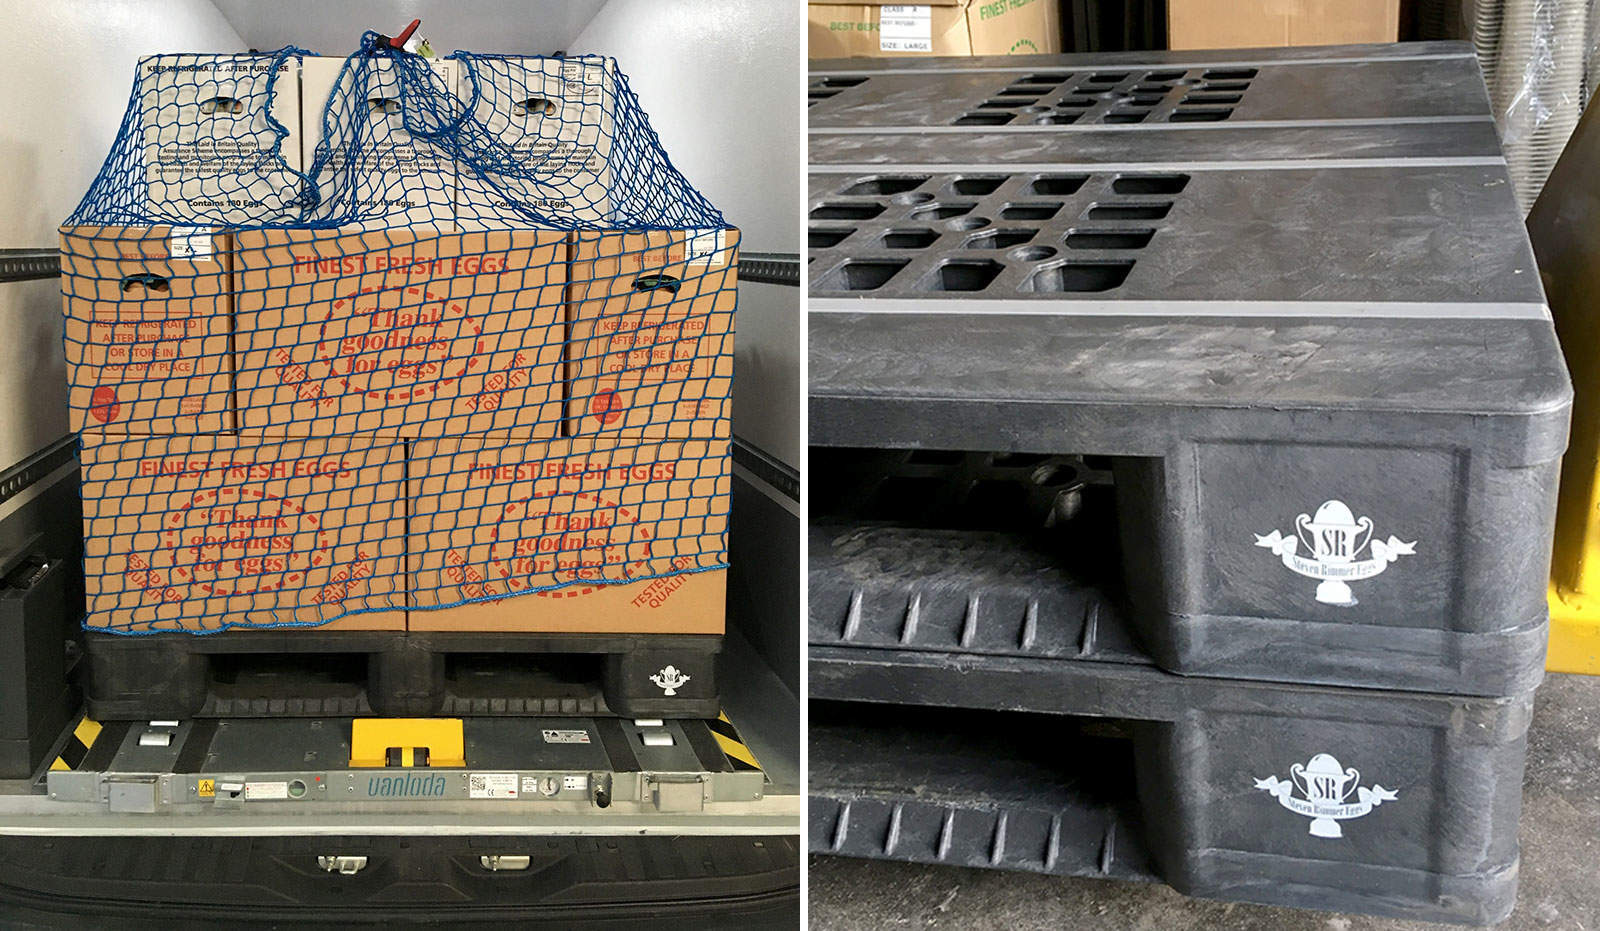 Steven Rimmer Eggs selects APB 1210 Pool Perforated 5R pallet